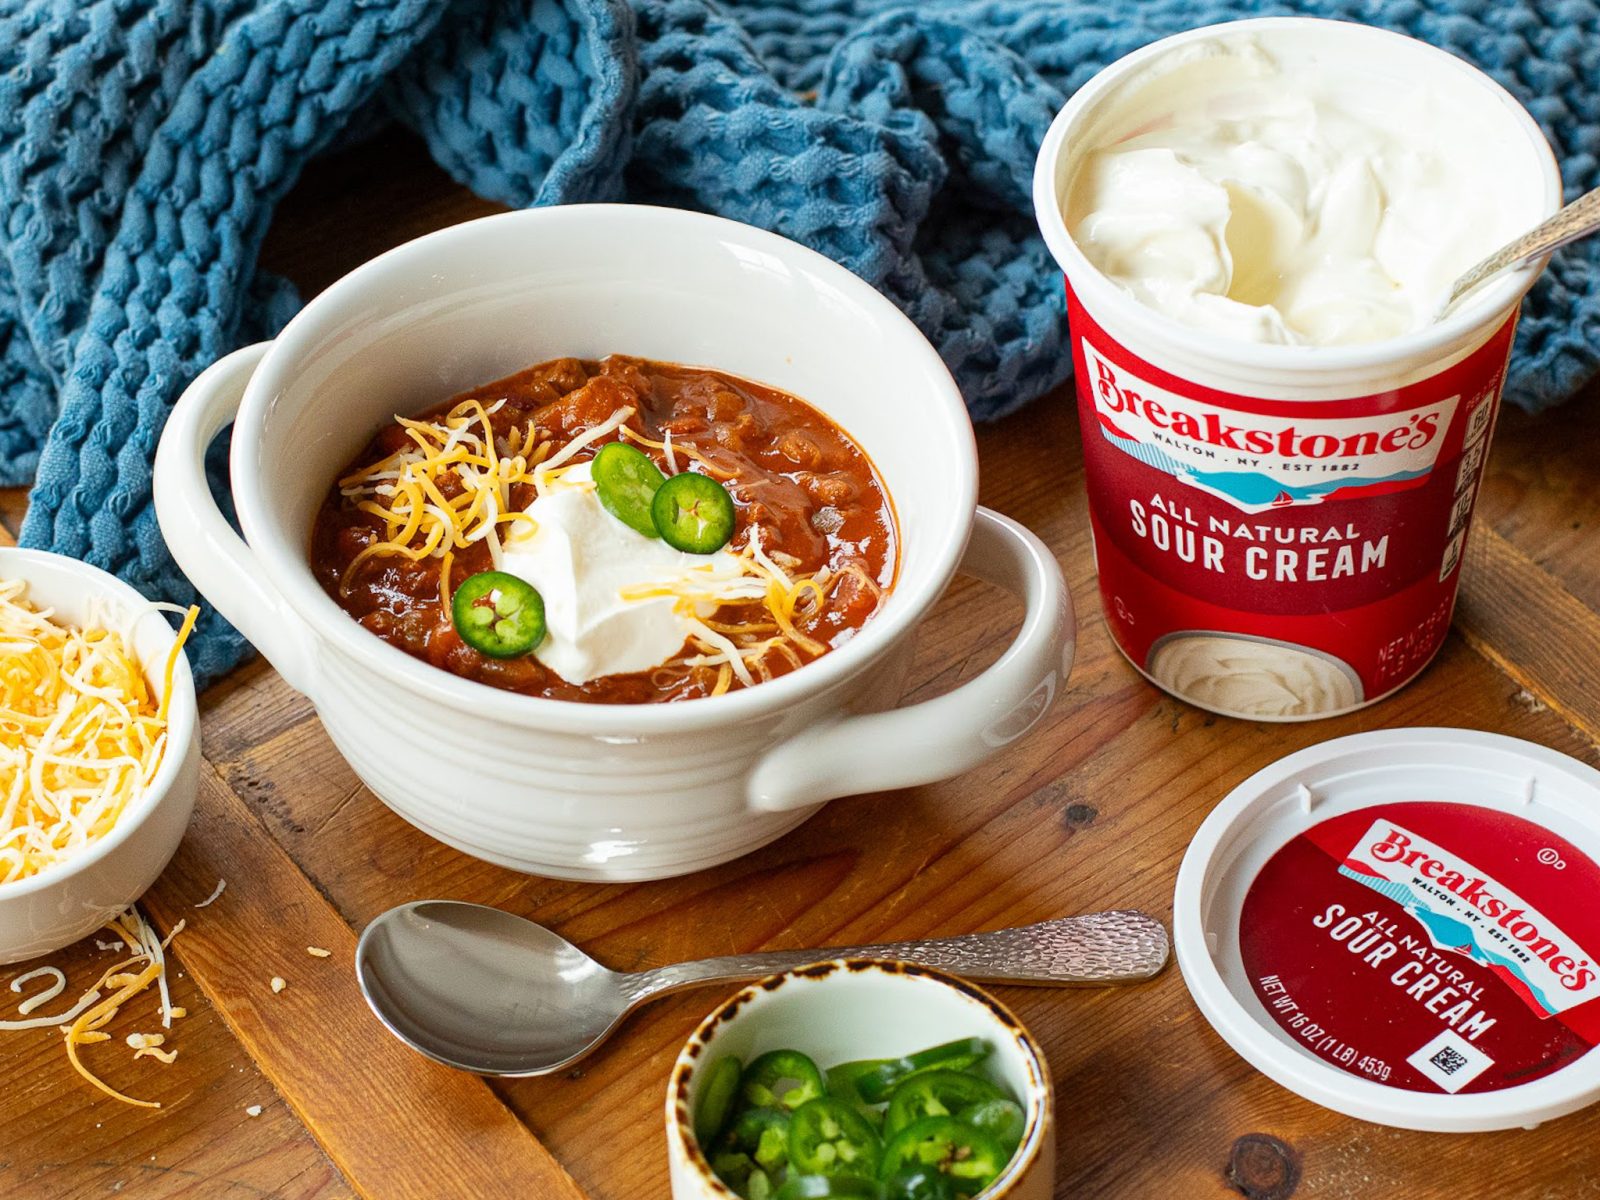 Get Breakstone’s Sour Cream As Low As 89¢ At Kroger